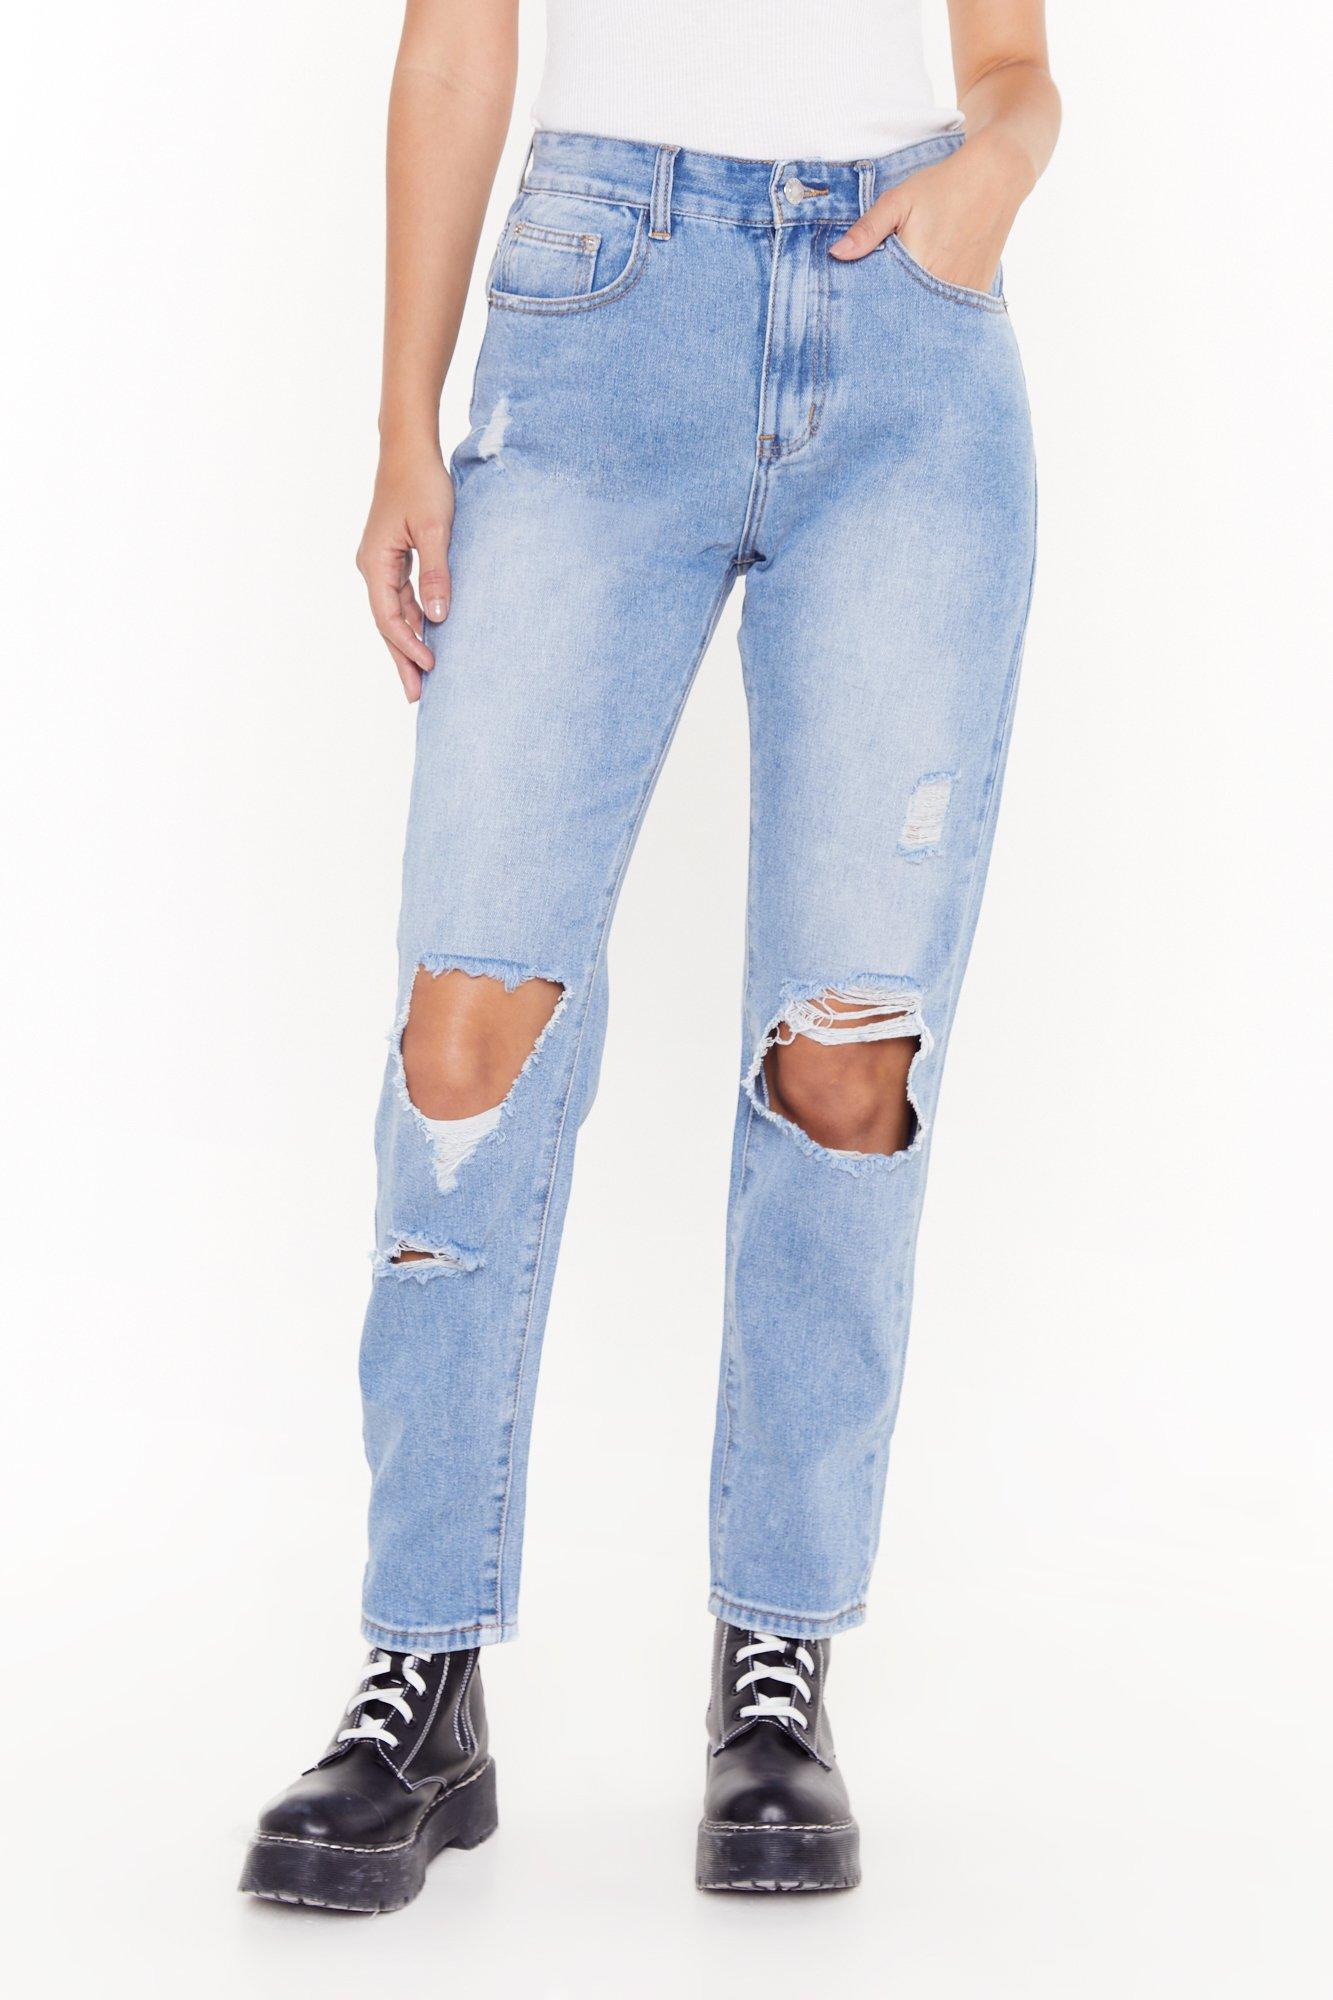 high waisted jeans blue ripped